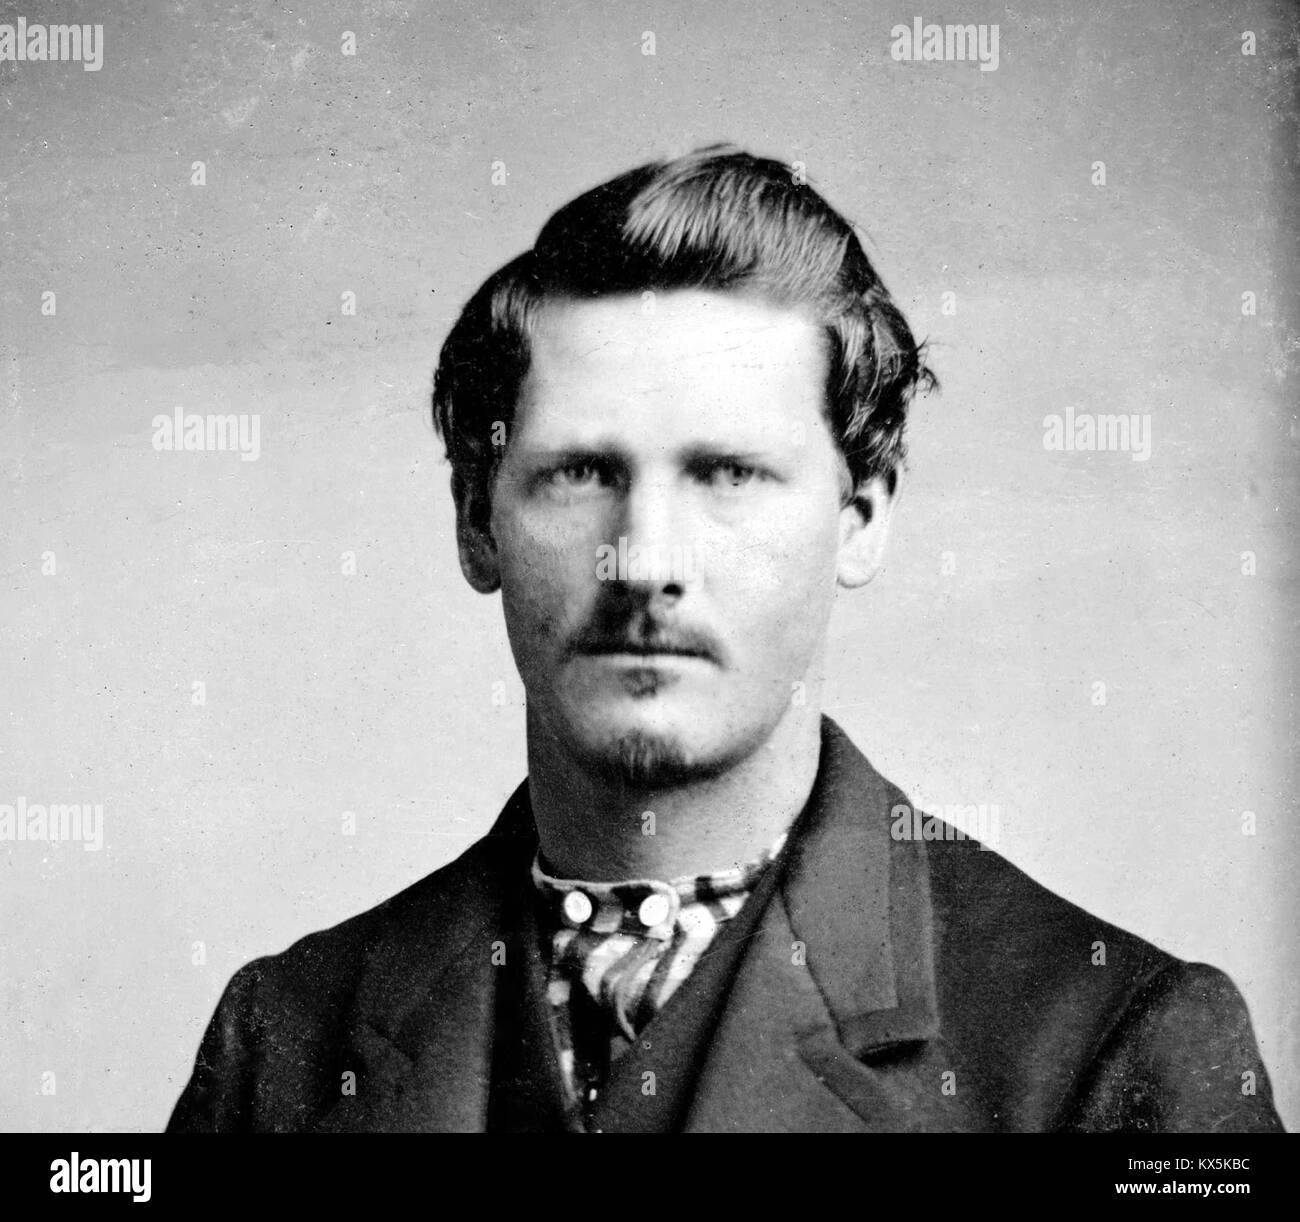 Wyatt Earp, Wyatt Berry Stapp Earp, American Old West deputy sheriff in Pima County, and deputy town marshal in Tombstone, Arizona Territory, who took part in the Gunfight at the O.K. Corral Stock Photo